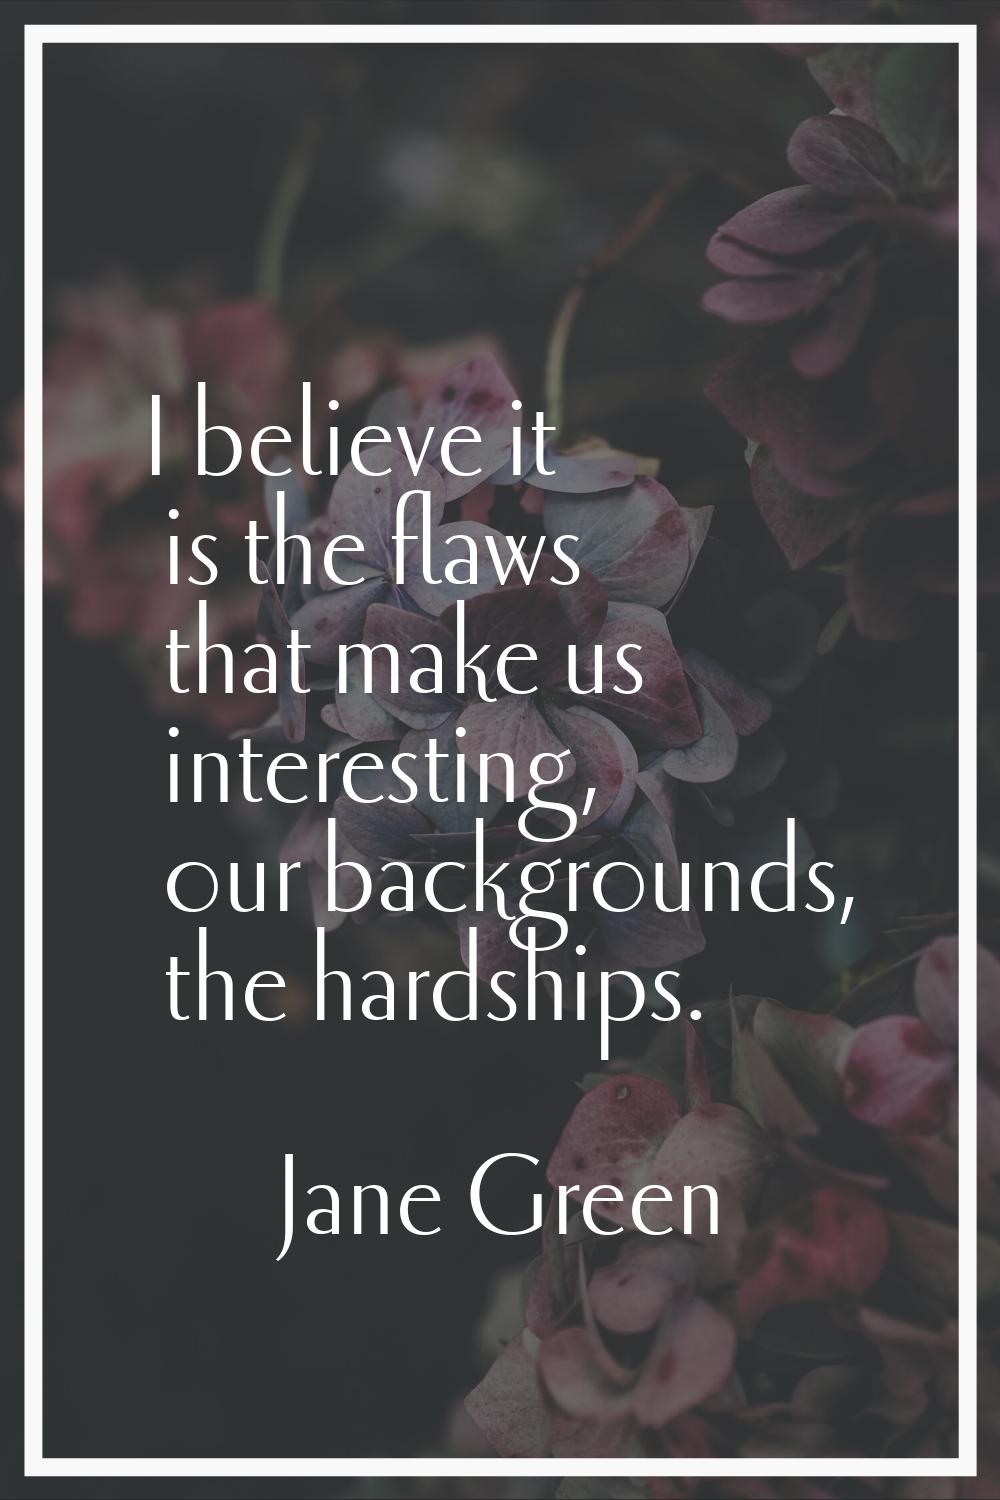 I believe it is the flaws that make us interesting, our backgrounds, the hardships.